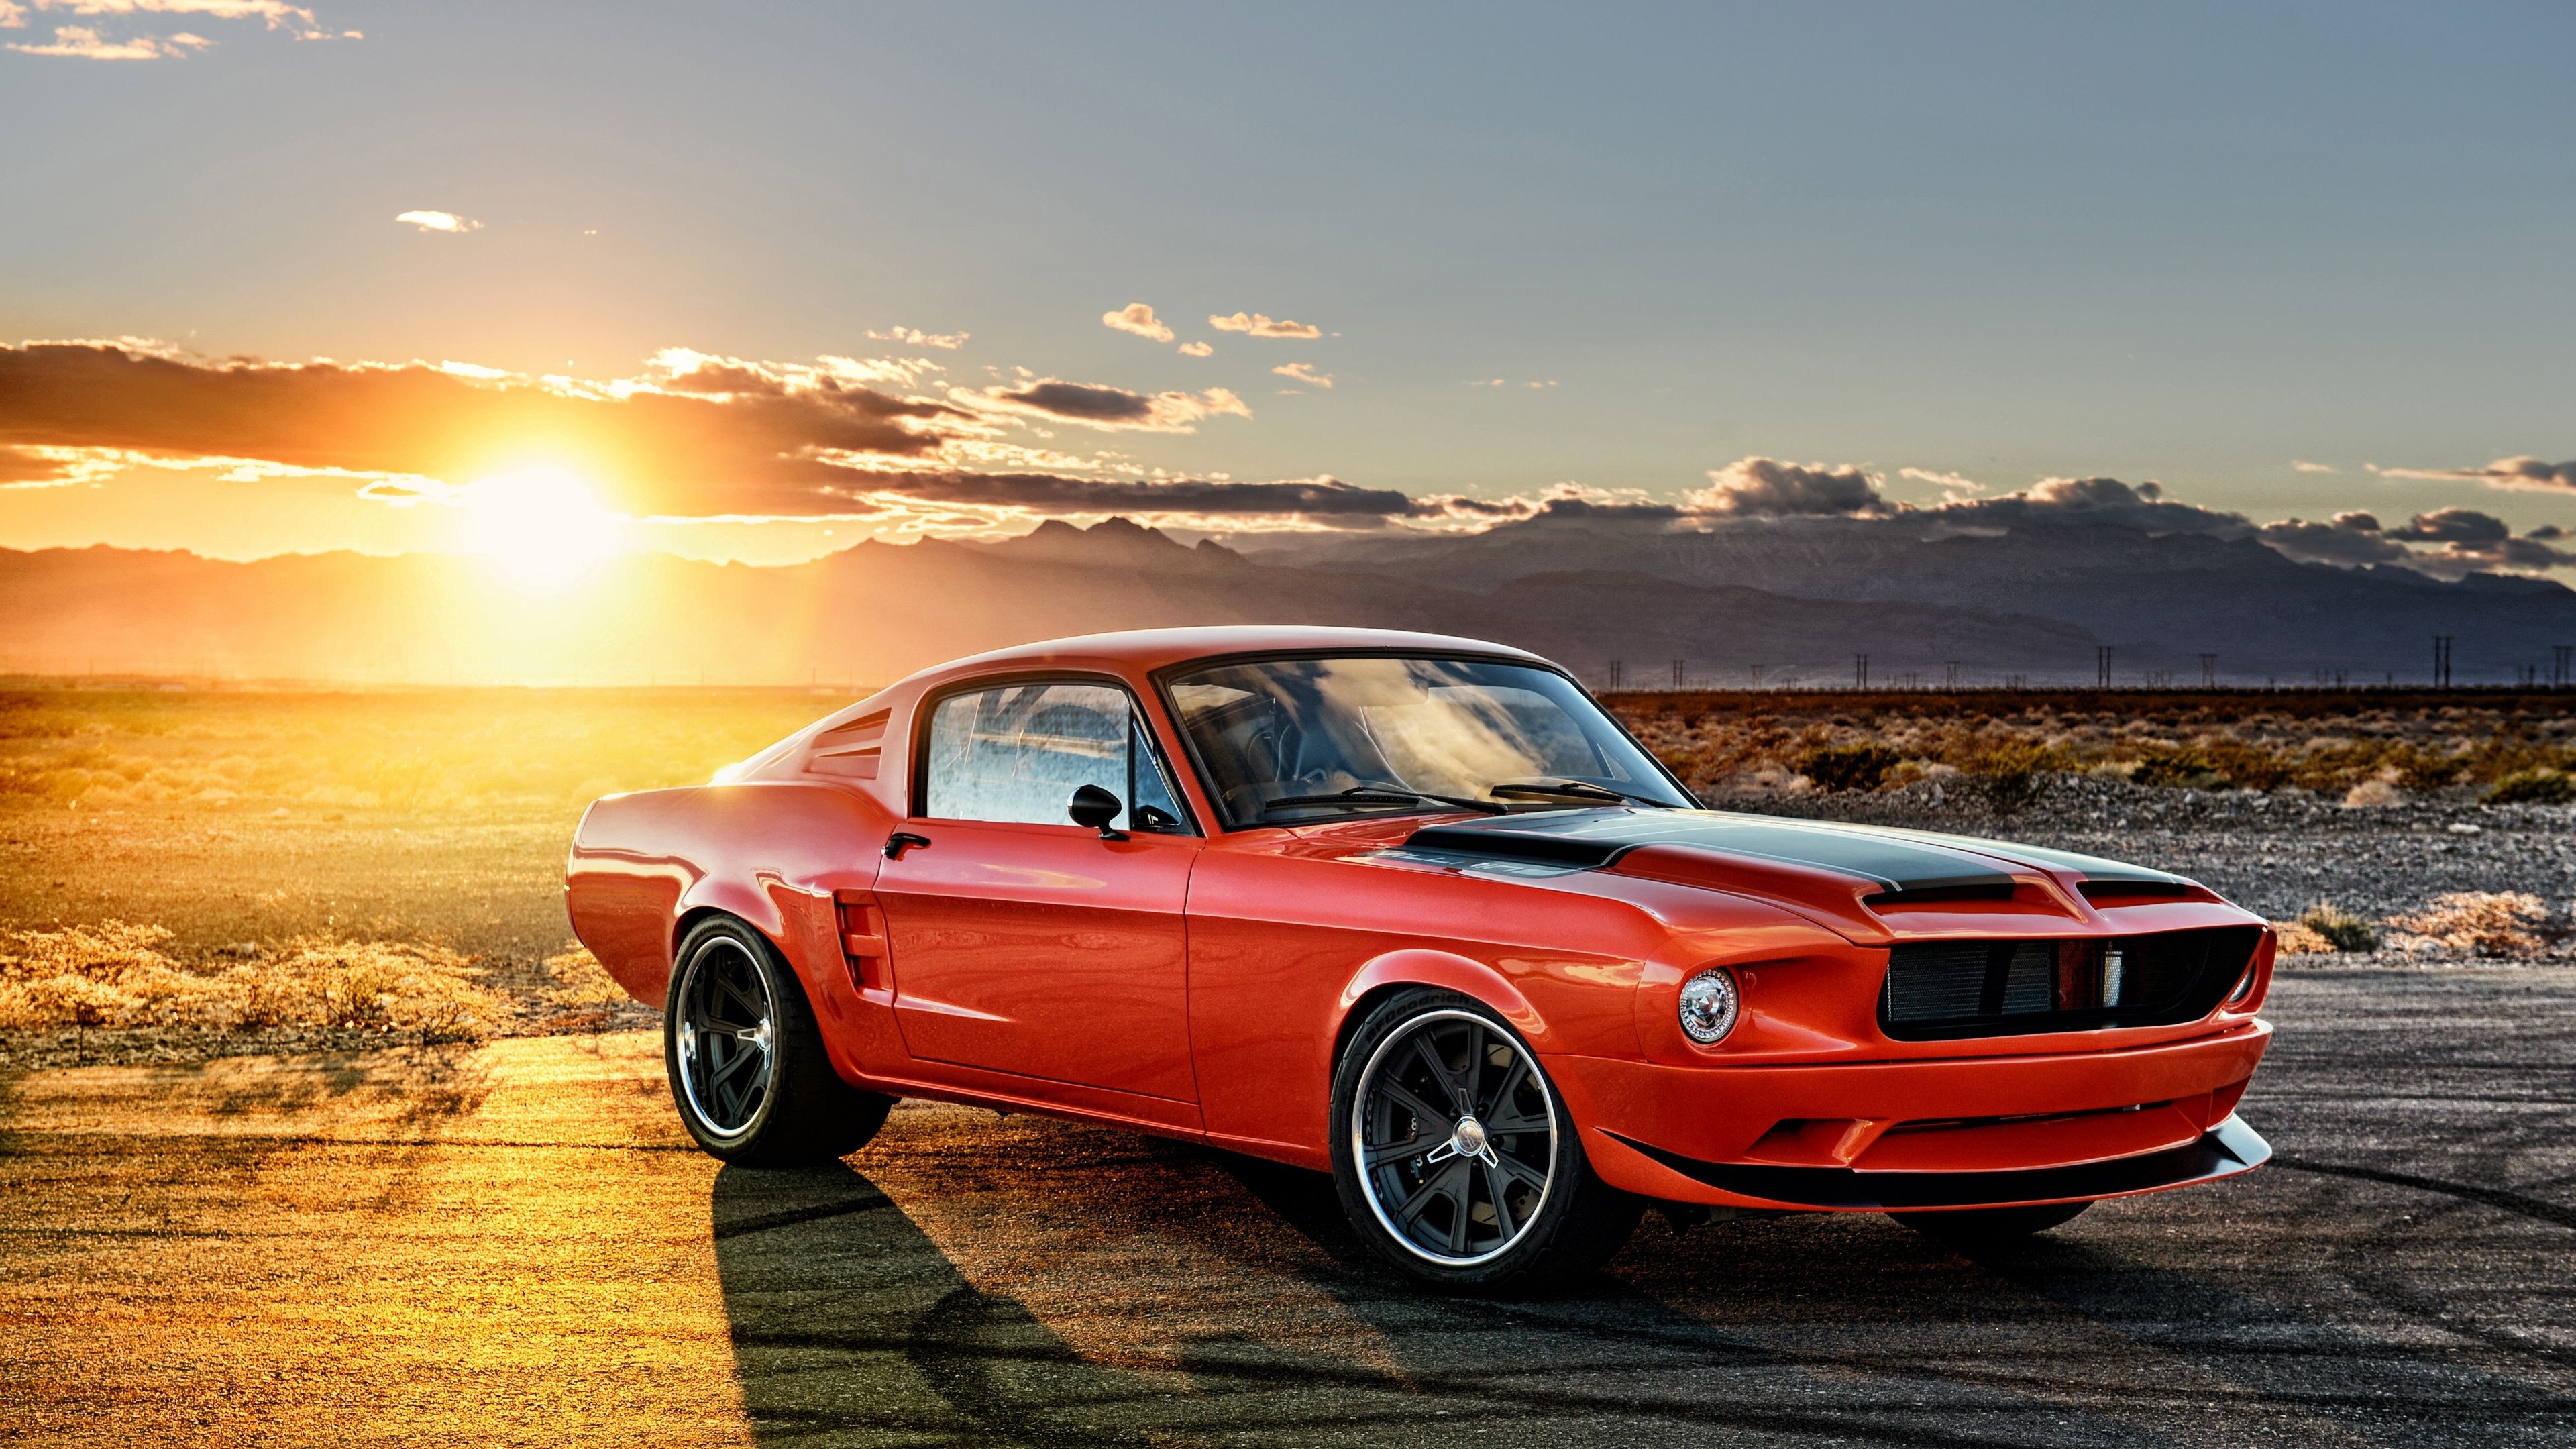 Ford Mustang Muscle Car 4k Muscle Cars Wallpaper, Hd Wallpaper, Ford Mustang Wallpaper, Cars Wallpape. Muscle Cars Mustang, Ford Mustang Fastback, Ford Mustang